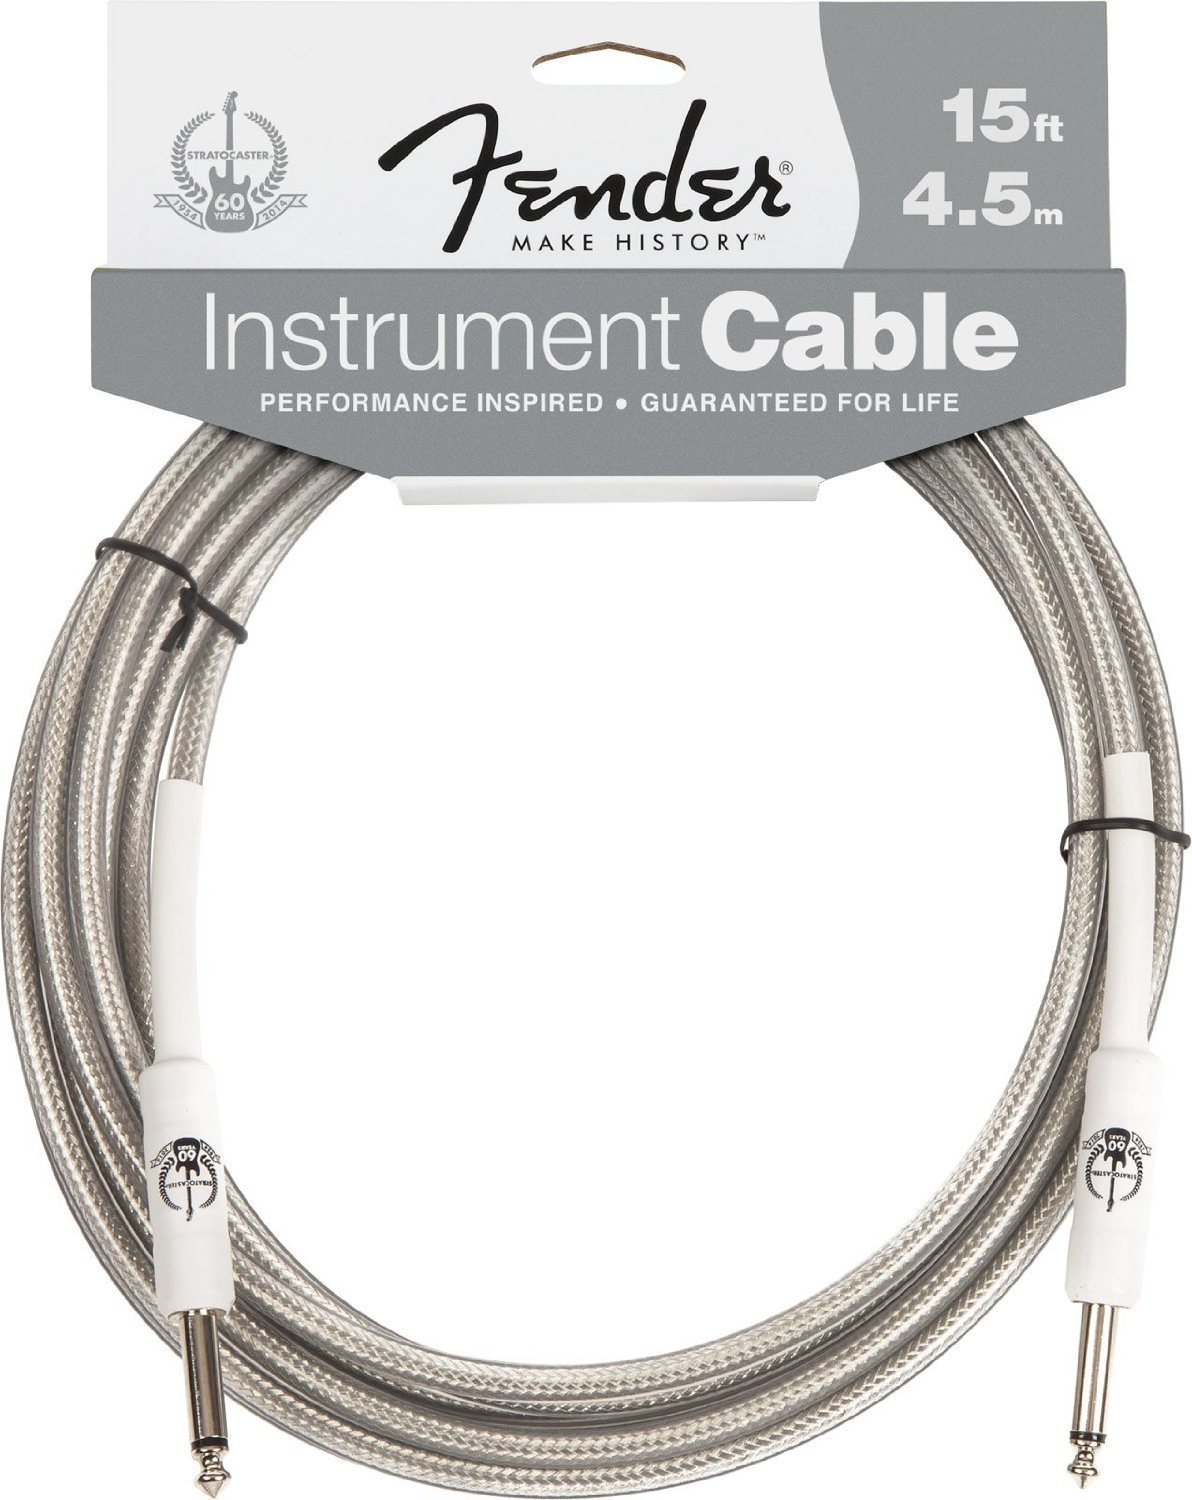 Instrument Cable Fender 60th Anniversary Instrument Cable 4,5 m